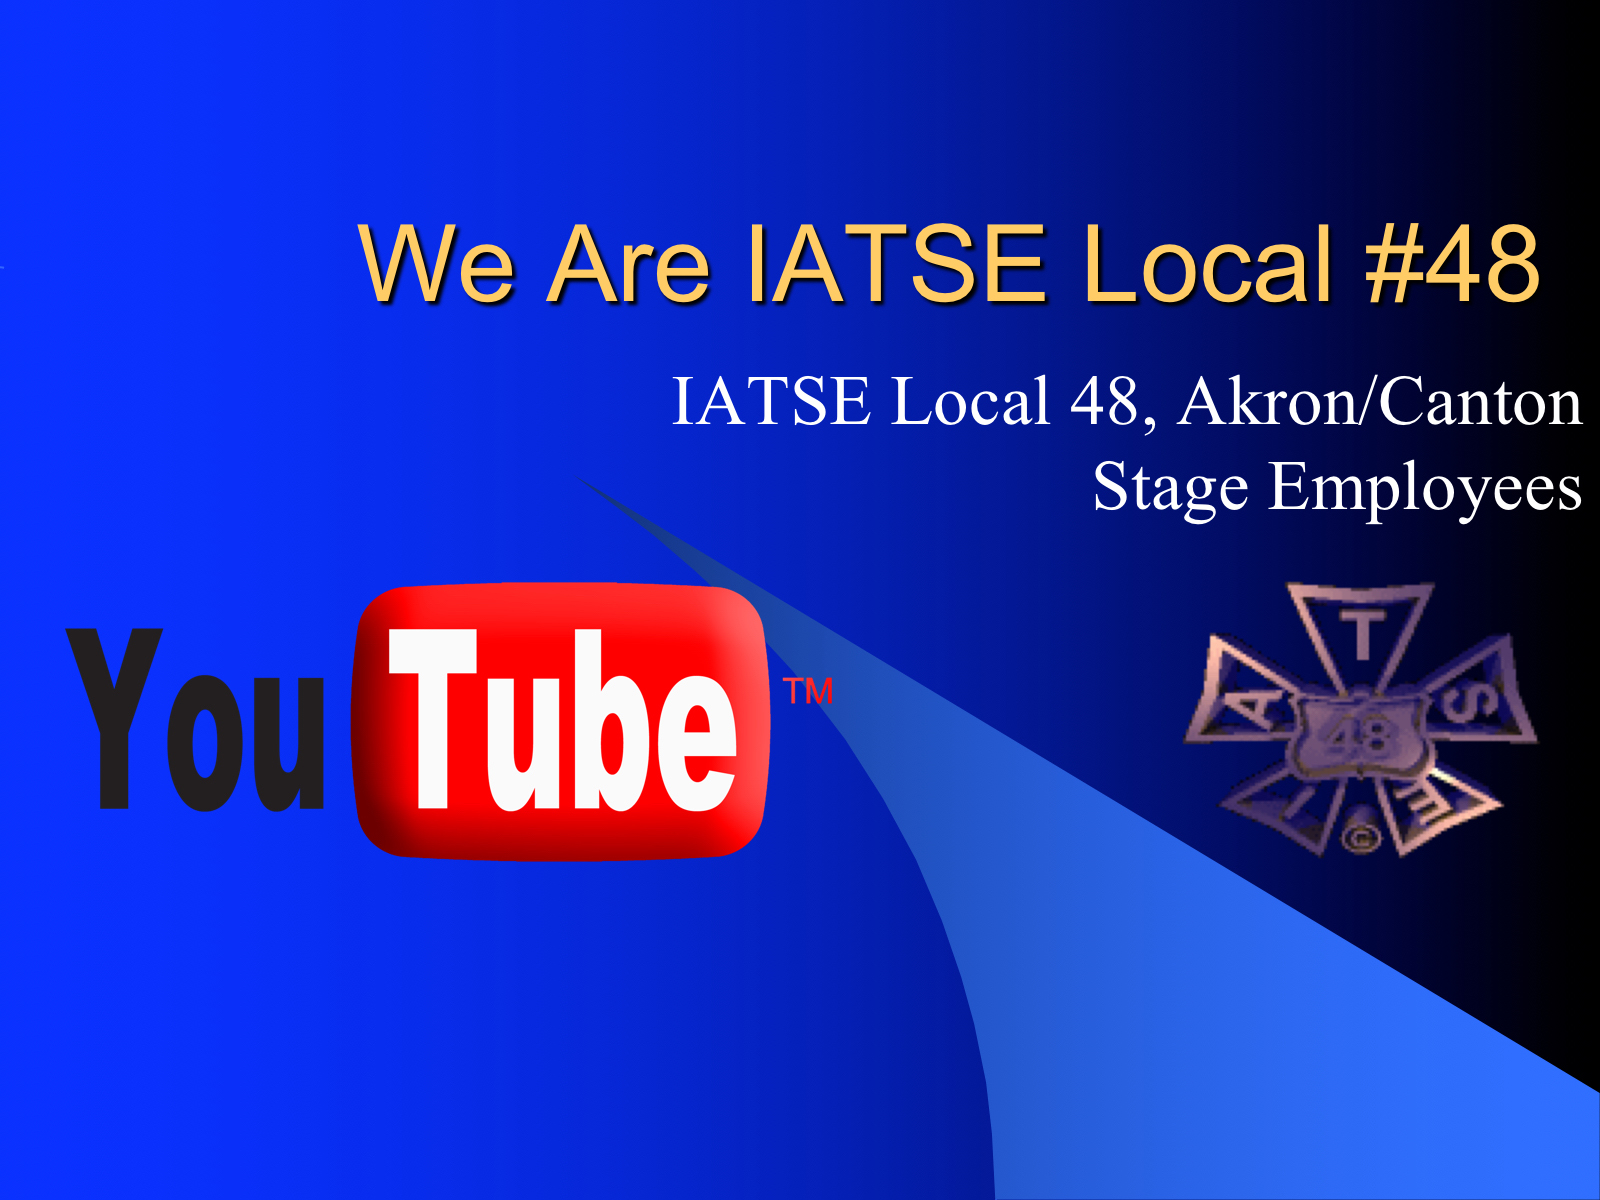 Visit Our YouTube Channel!